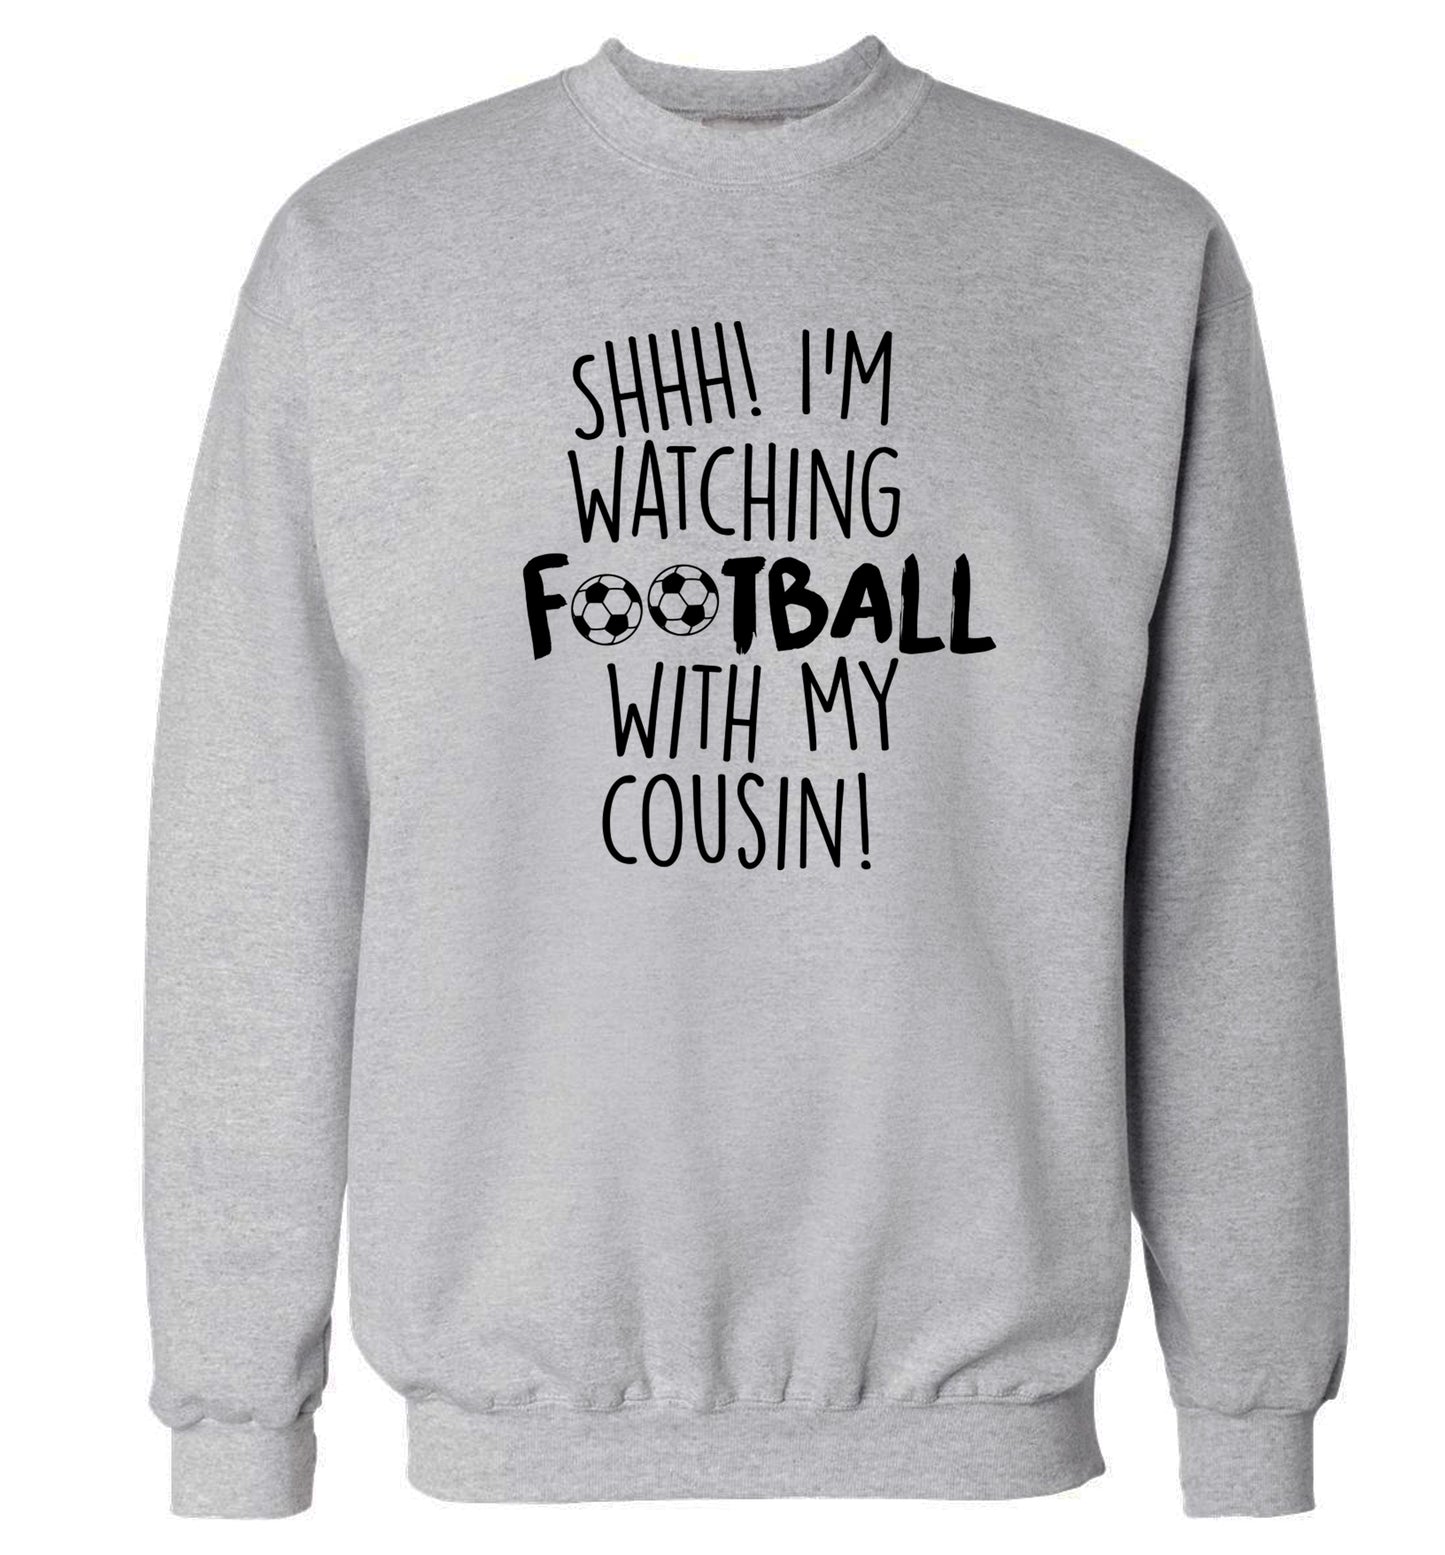 Shhh I'm watching football with my cousin Adult's unisexgrey Sweater 2XL